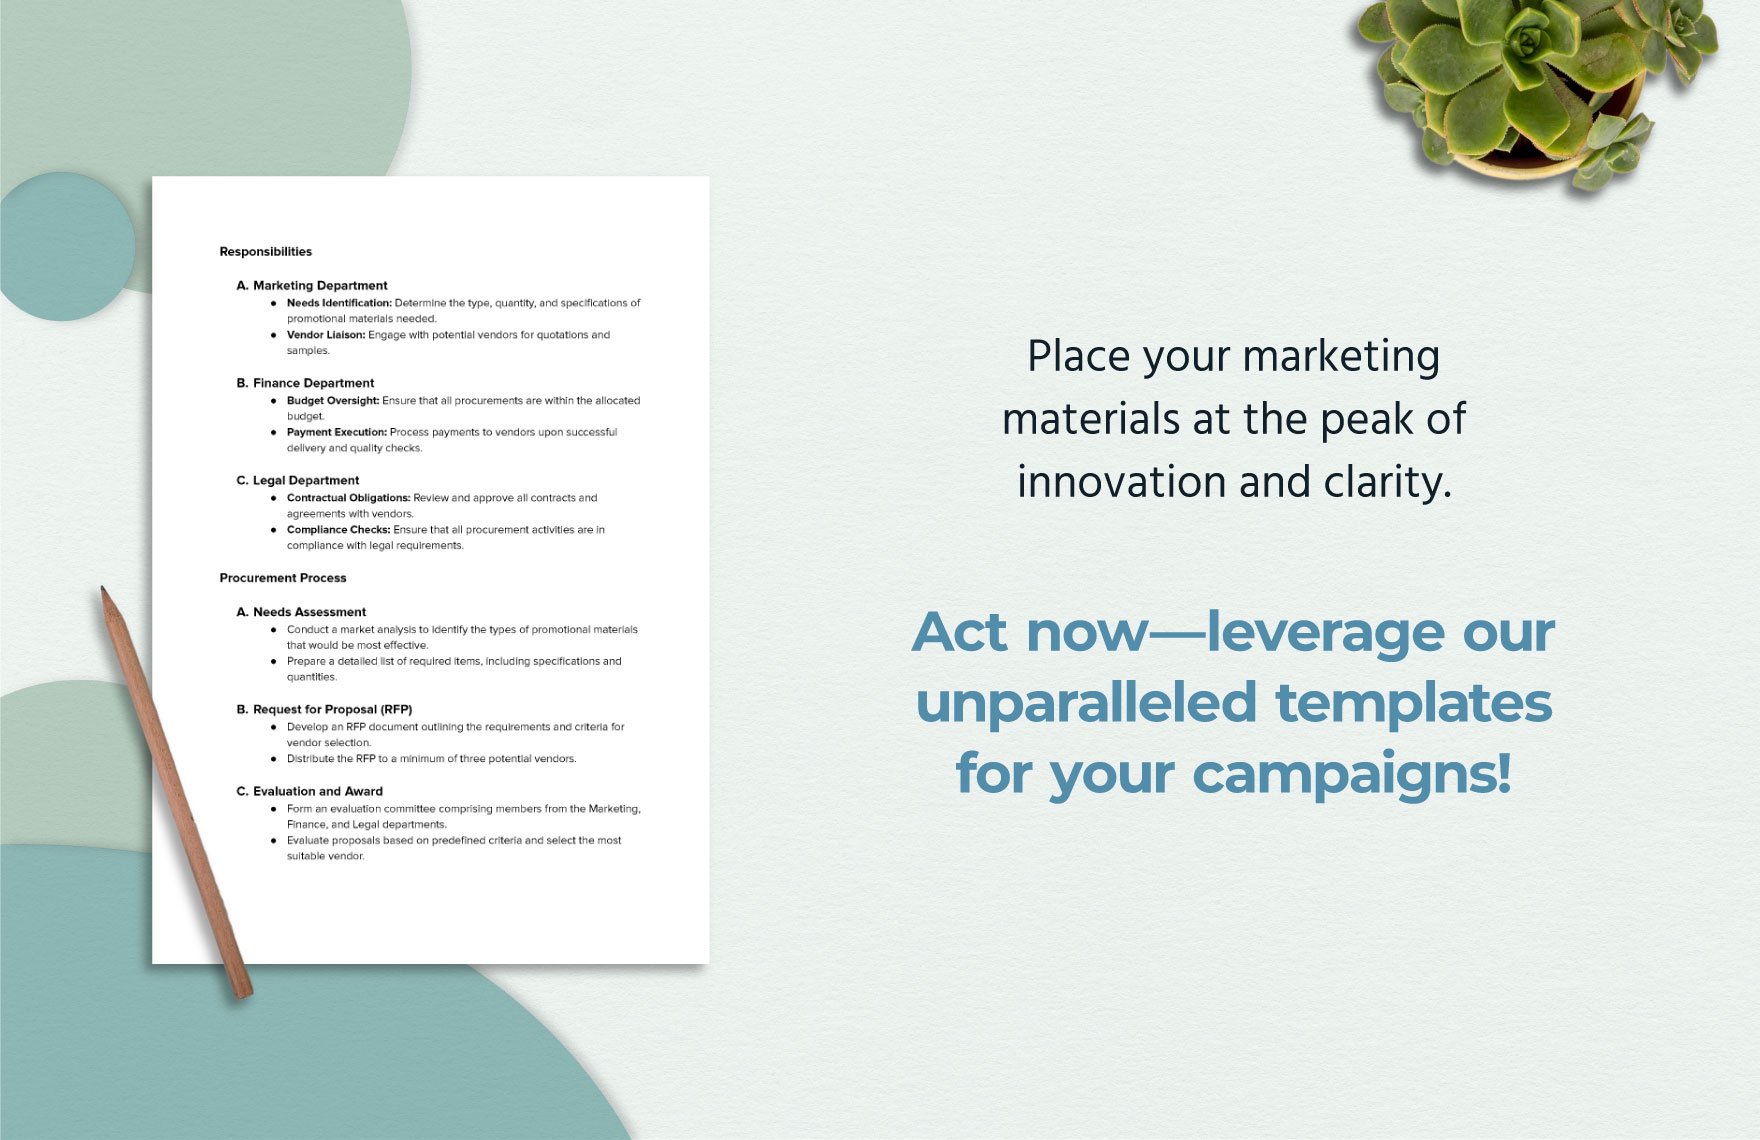 Marketing Promo Material Procurement Policy Template